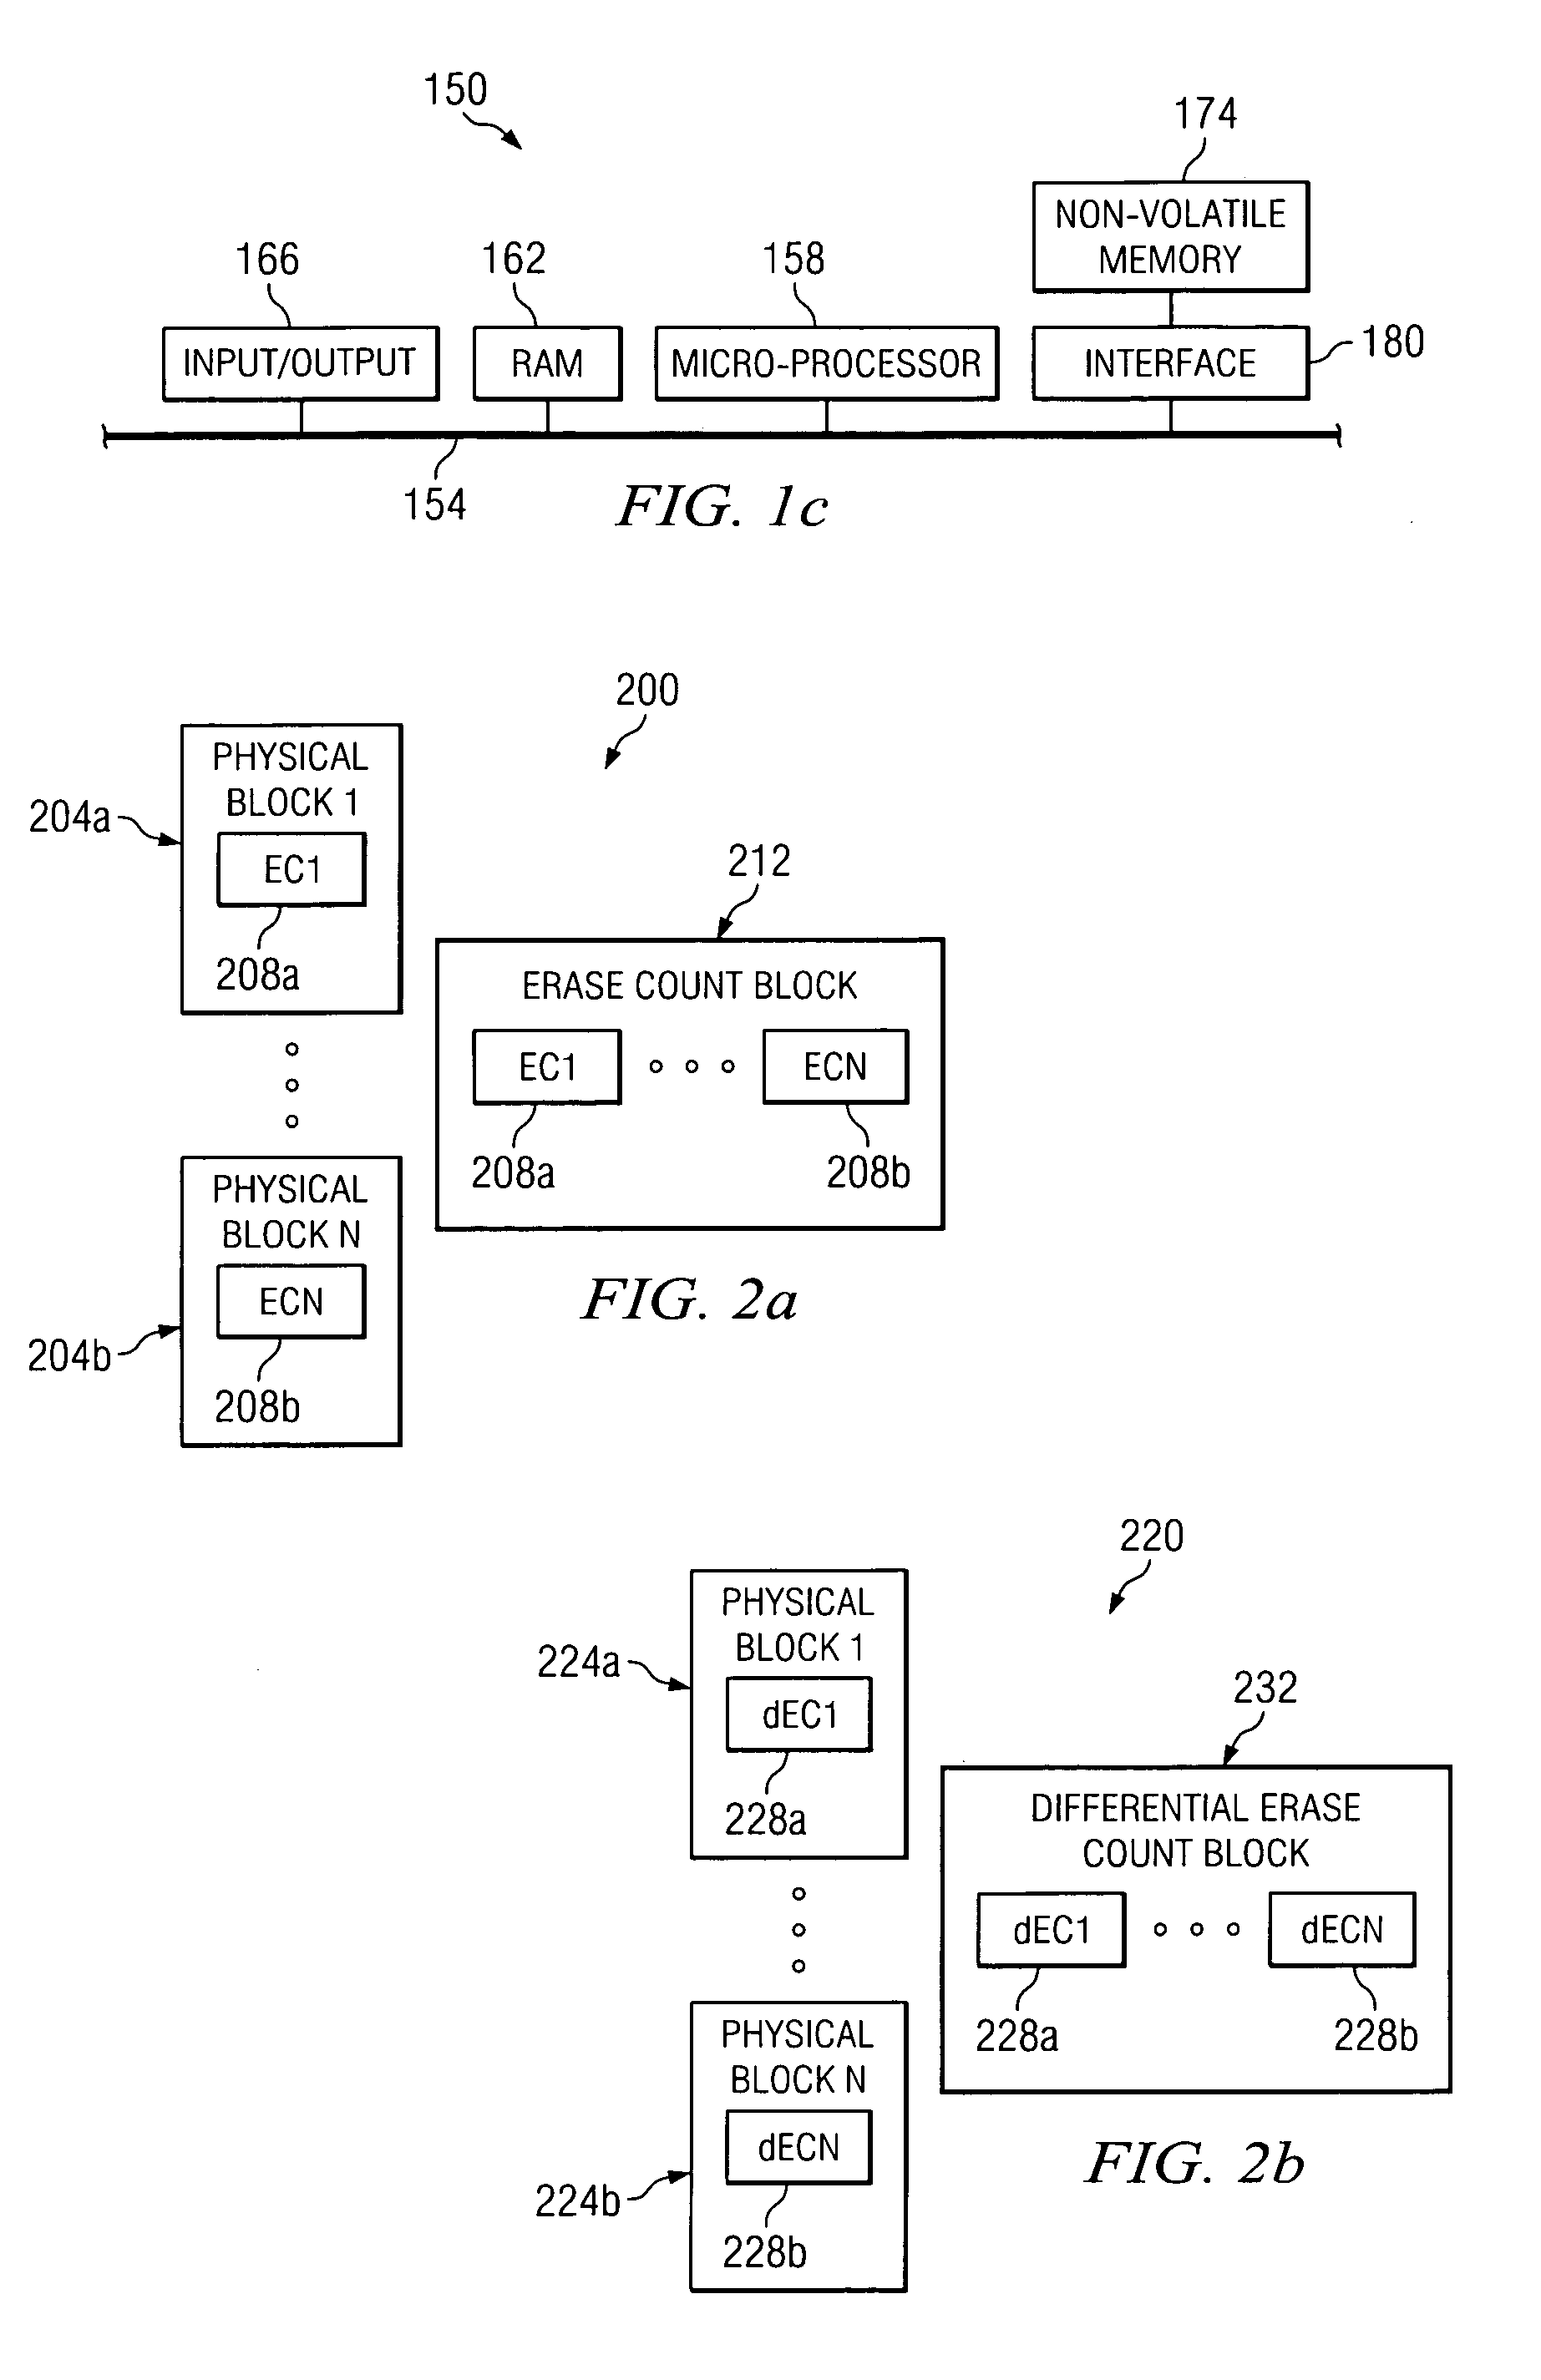 Erase count differential table within a non-volatile memory system